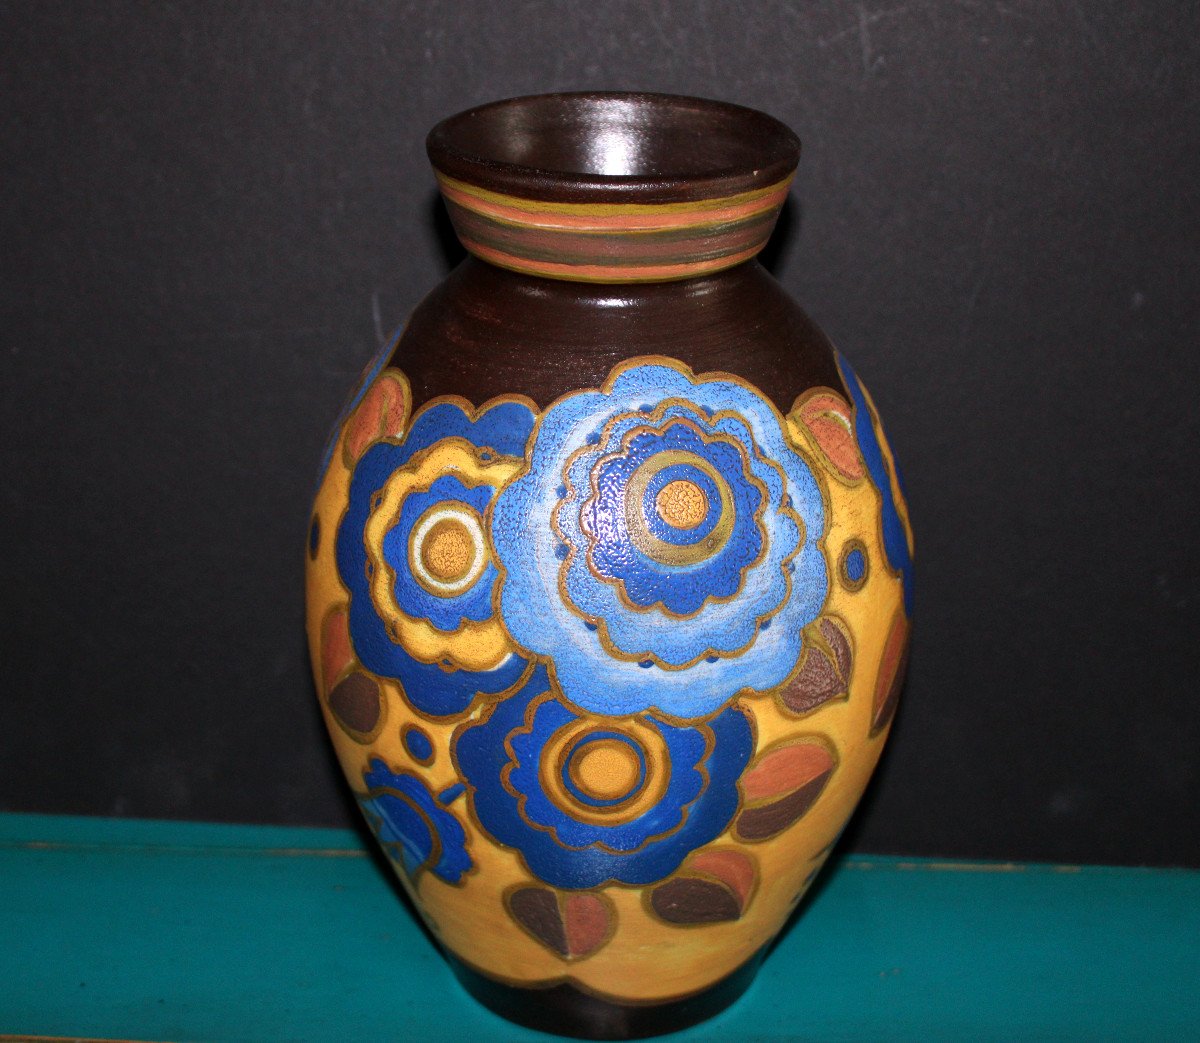 Ceramic Vase Signed By The Keramis Brothers, Art Deco